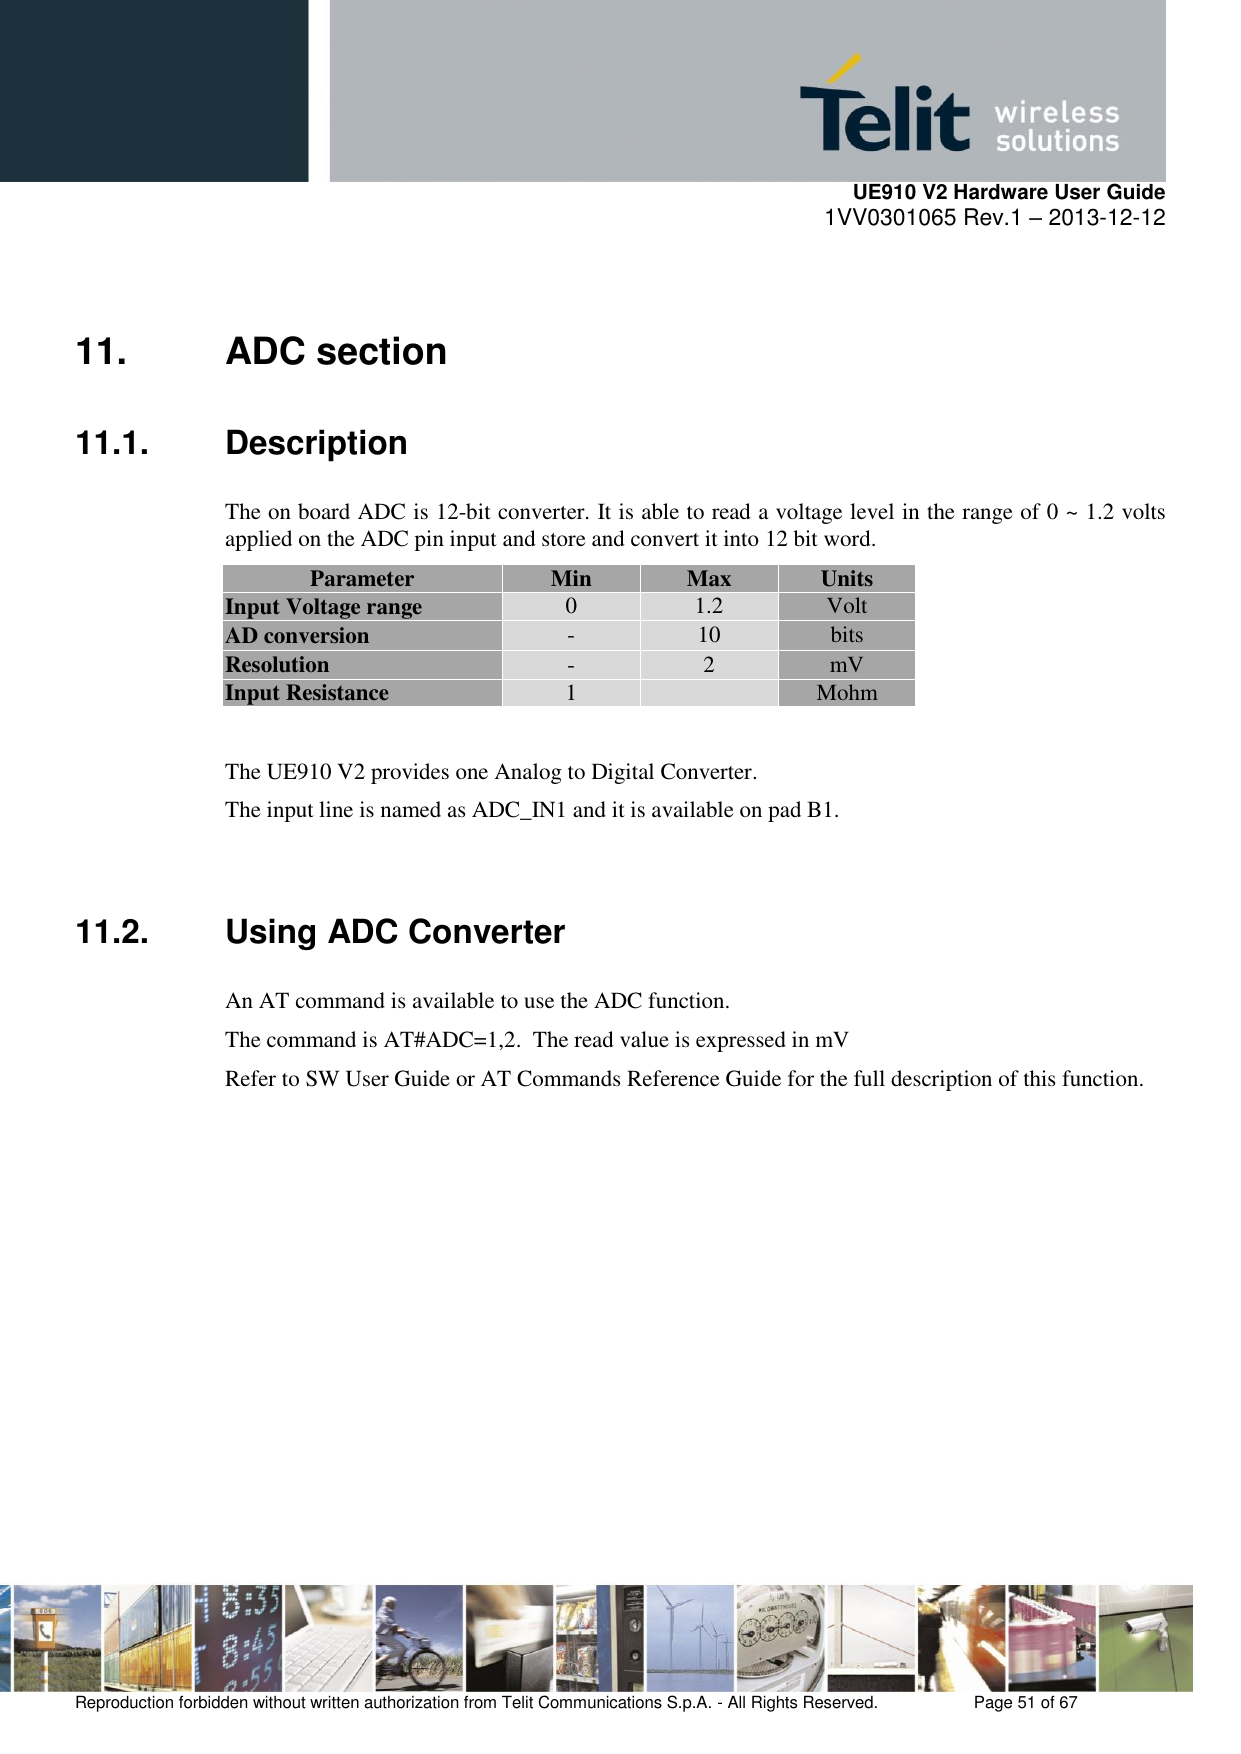     UE910 V2 Hardware User Guide 1VV0301065 Rev.1 – 2013-12-12  Reproduction forbidden without written authorization from Telit Communications S.p.A. - All Rights Reserved.    Page 51 of 67                                                     11.  ADC section 11.1.  Description The on board ADC is 12-bit converter. It is able to read a voltage level in the range of 0 ~ 1.2 volts applied on the ADC pin input and store and convert it into 12 bit word. Parameter Min Max Units Input Voltage range 0 1.2 Volt AD conversion - 10 bits Resolution - 2 mV Input Resistance 1  Mohm  The UE910 V2 provides one Analog to Digital Converter.  The input line is named as ADC_IN1 and it is available on pad B1.  11.2. Using ADC Converter An AT command is available to use the ADC function.  The command is AT#ADC=1,2.  The read value is expressed in mV Refer to SW User Guide or AT Commands Reference Guide for the full description of this function.                